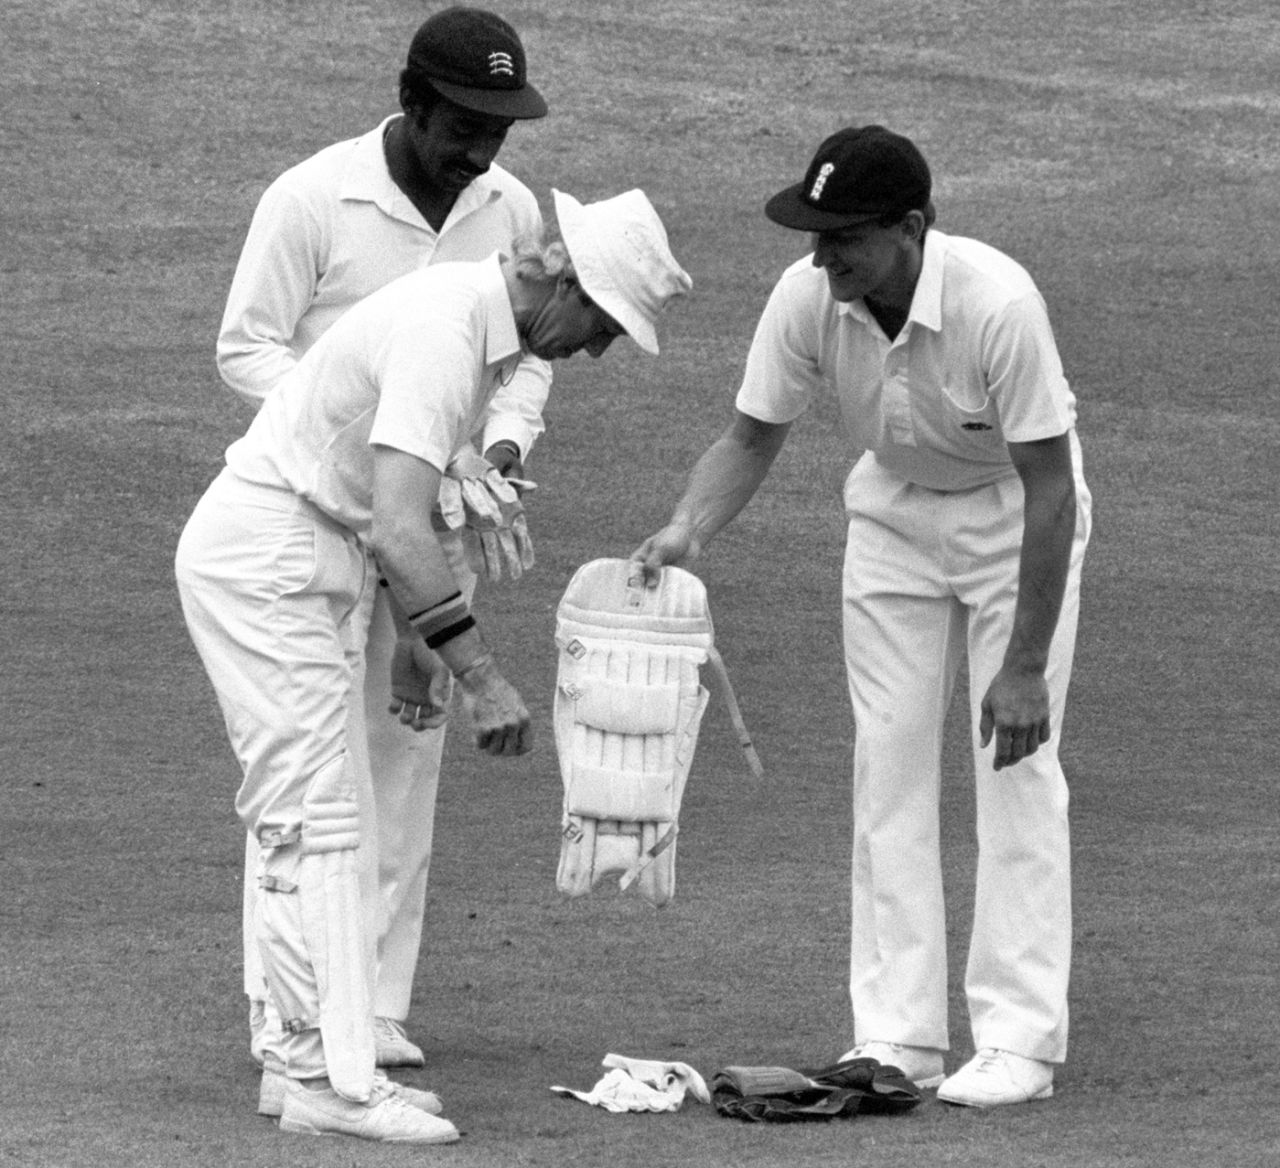 Bill Athey helps substitute keeper Bob Taylor put his pads on while Roland Butcher holds the gloves, England v New Zealand, 1st Test, Lord's, 2nd day, July 25, 1986